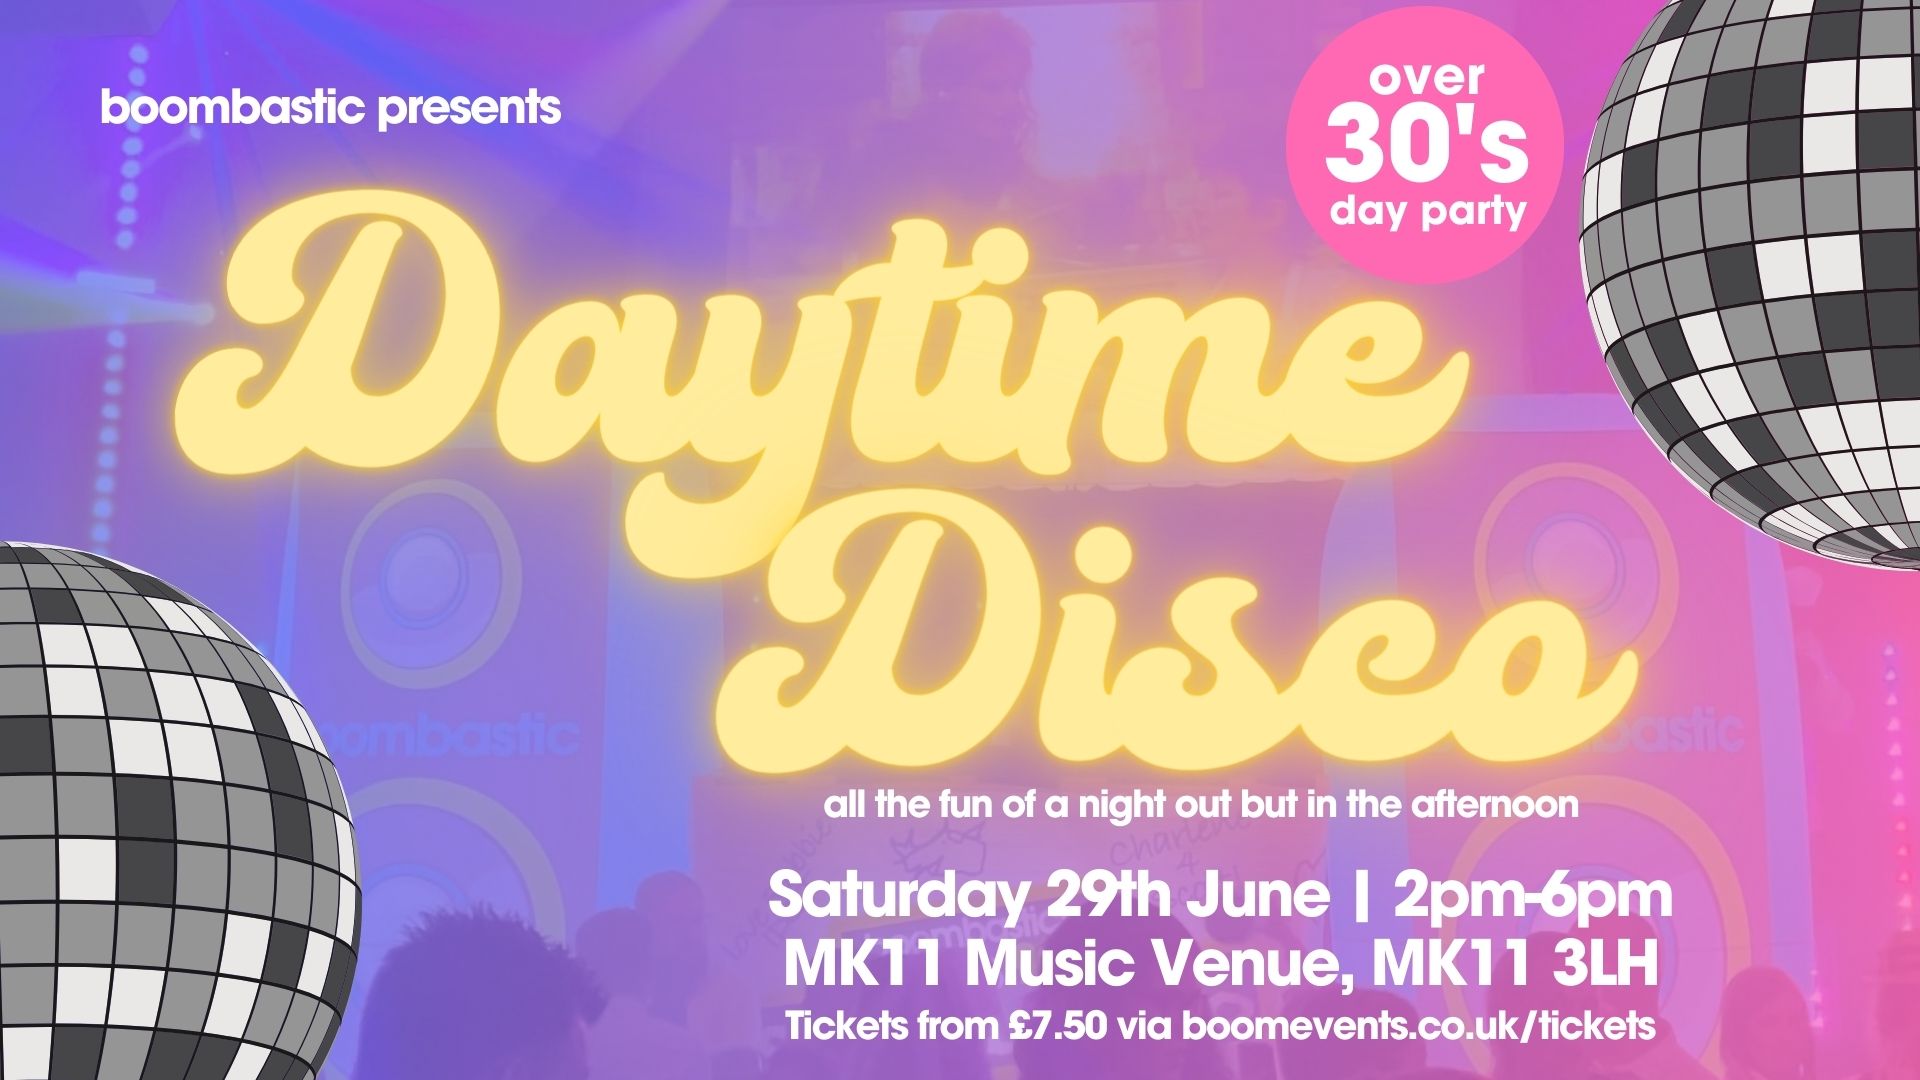 DAYTIME DISCO MK - For the Over 30s Crowd